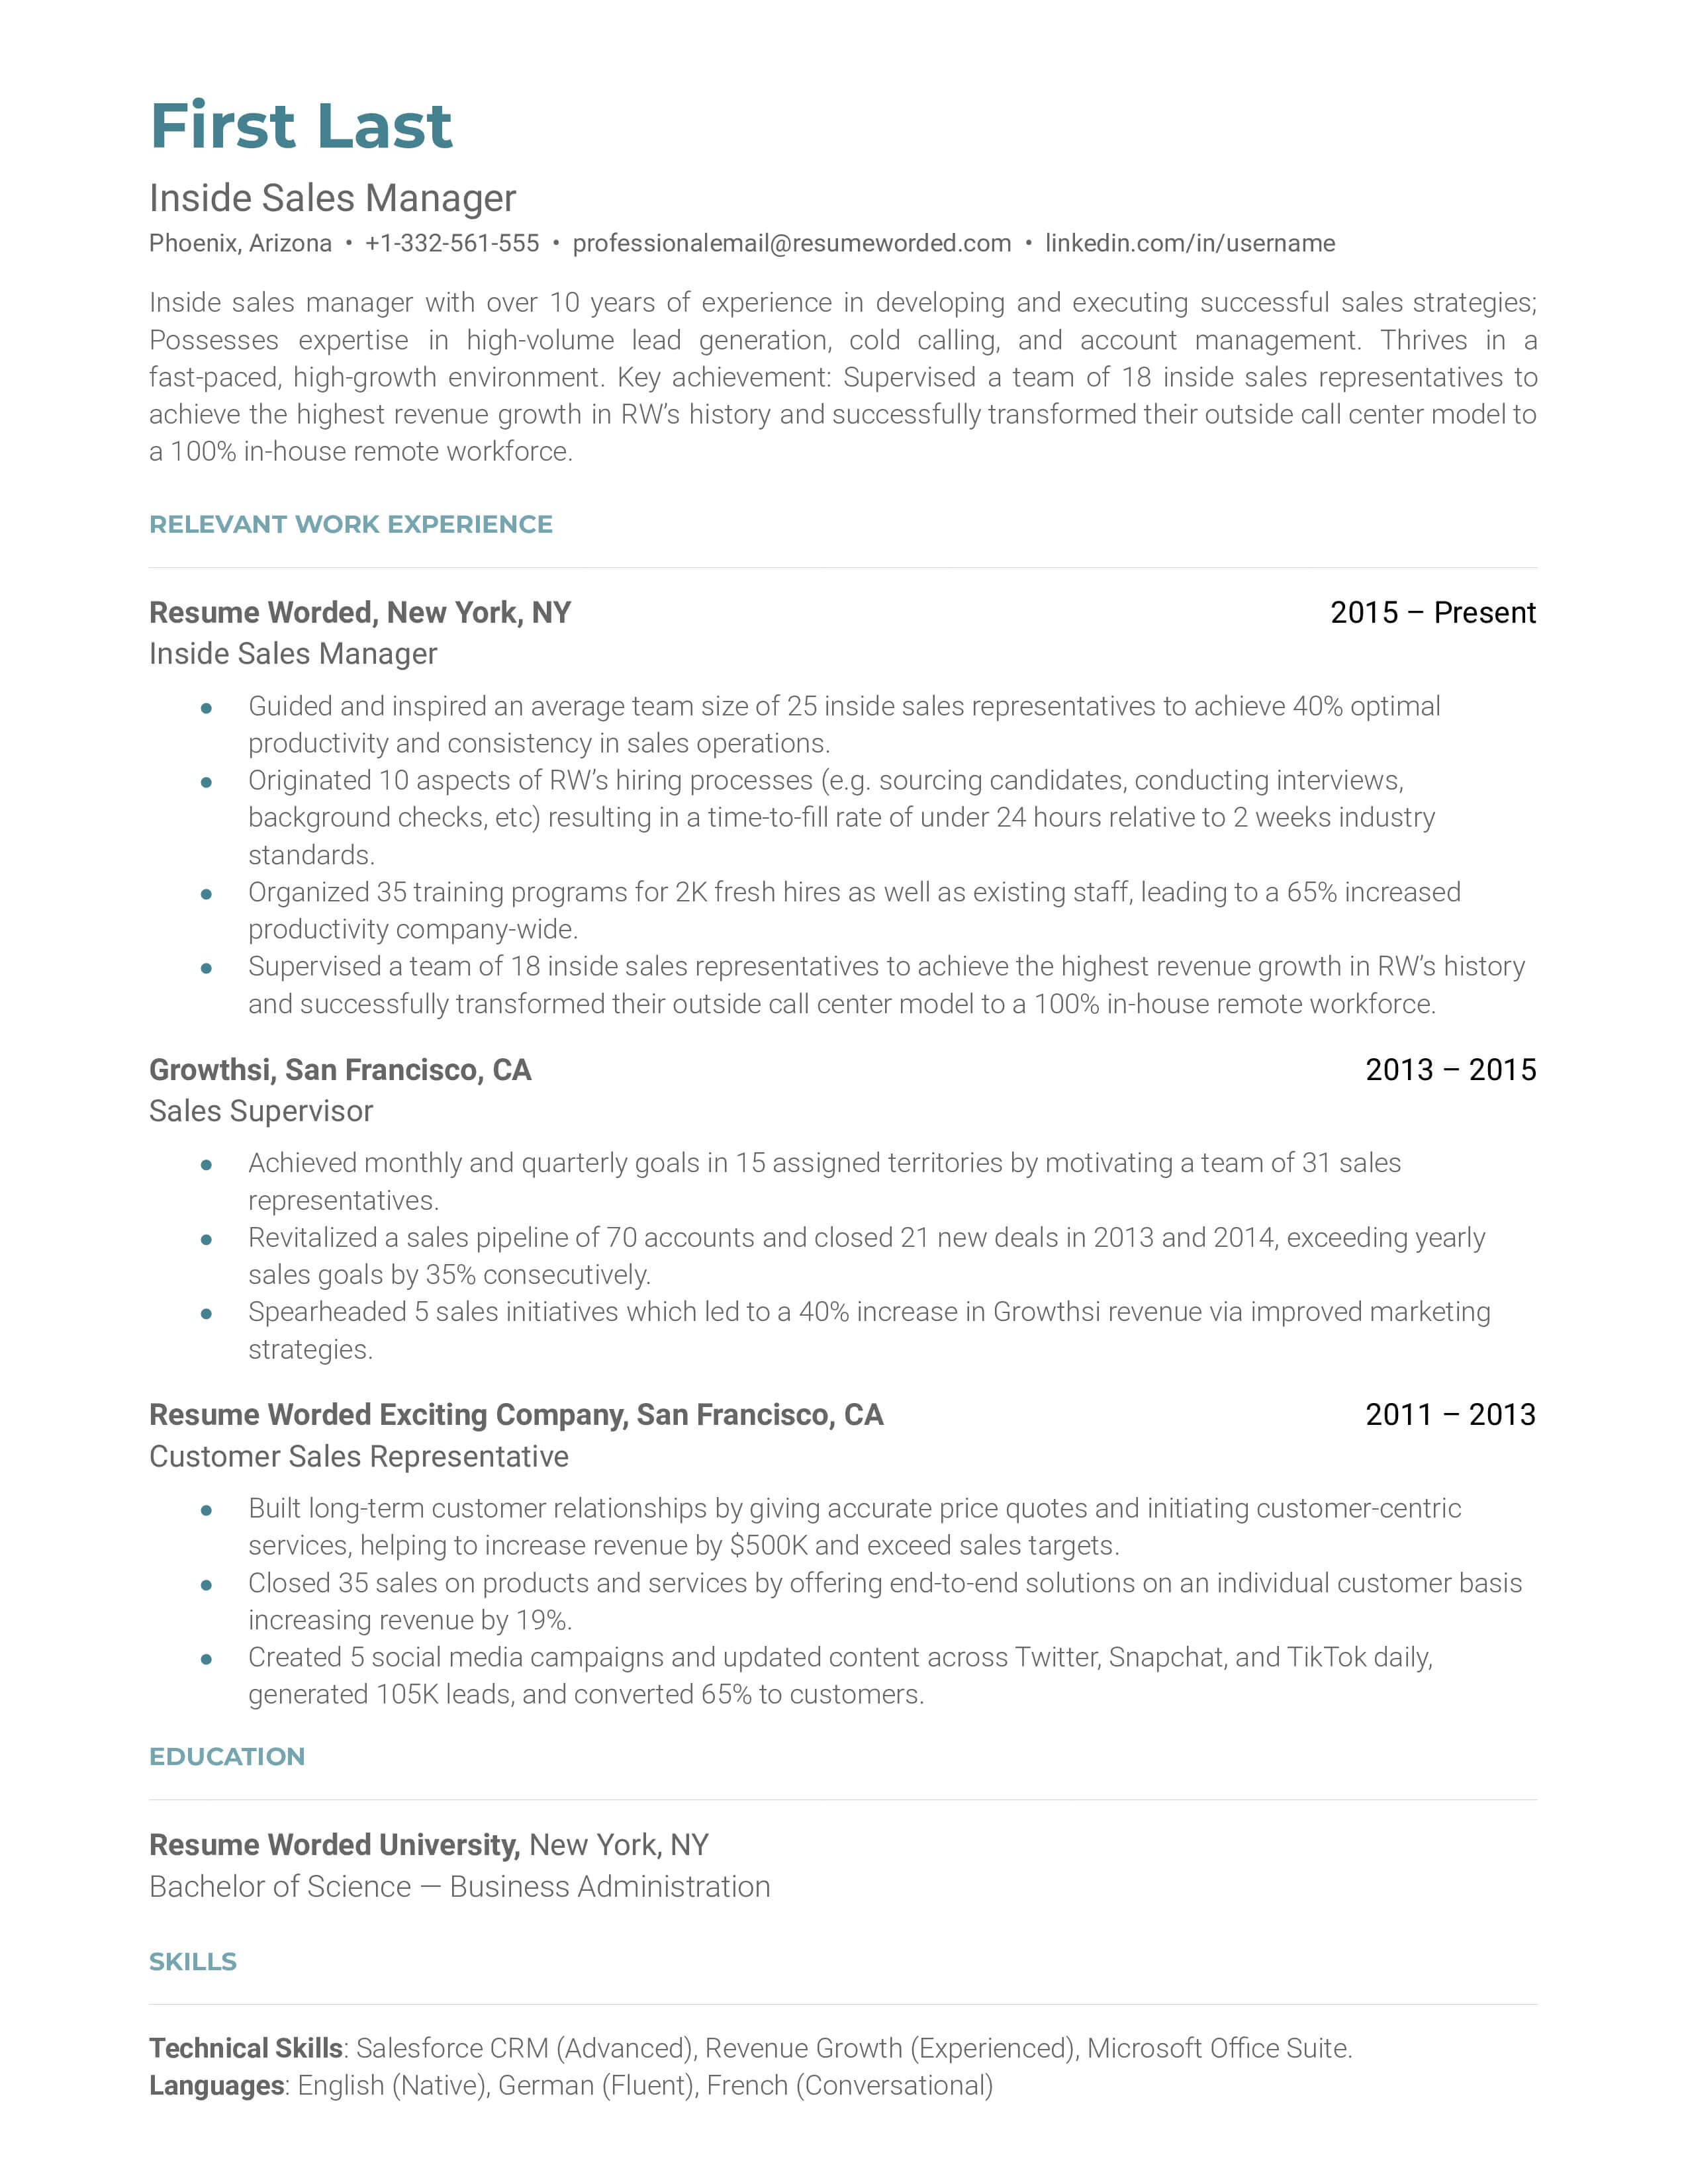 This resume highlights the experience and skills of an inside sales manager in different companies. 